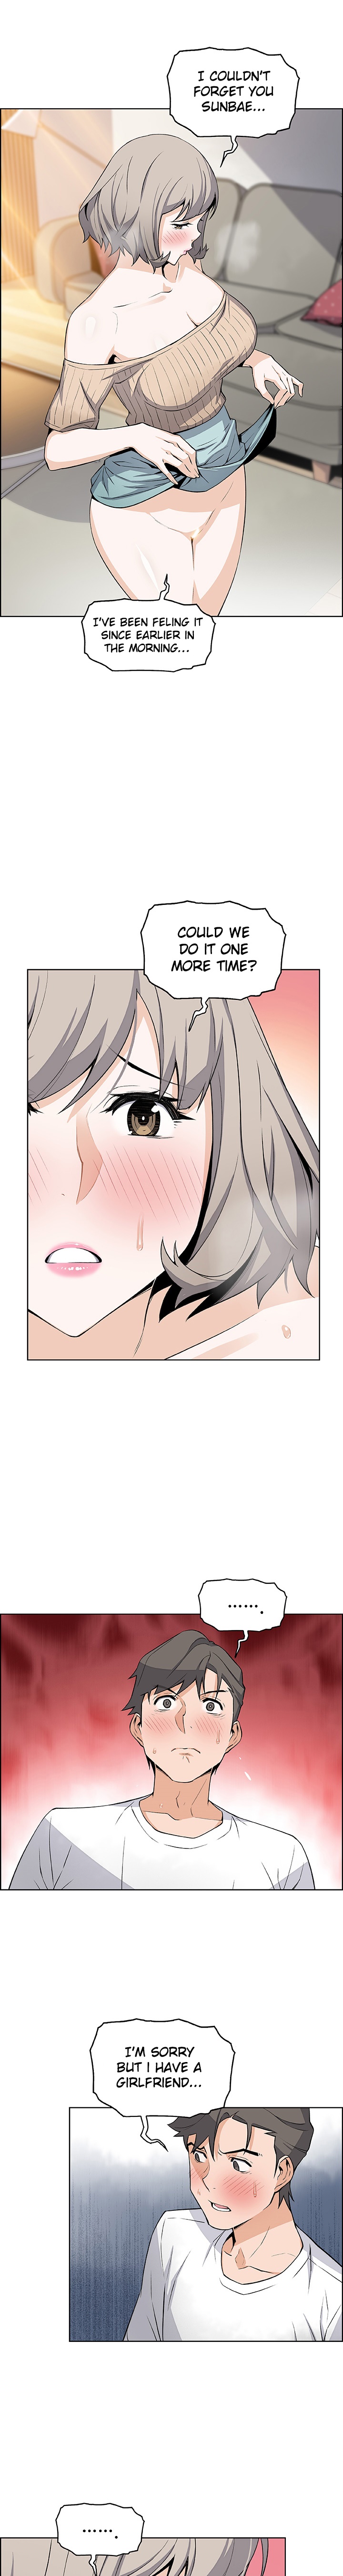 Housekeeper Manhwa - Chapter 19 Page 5